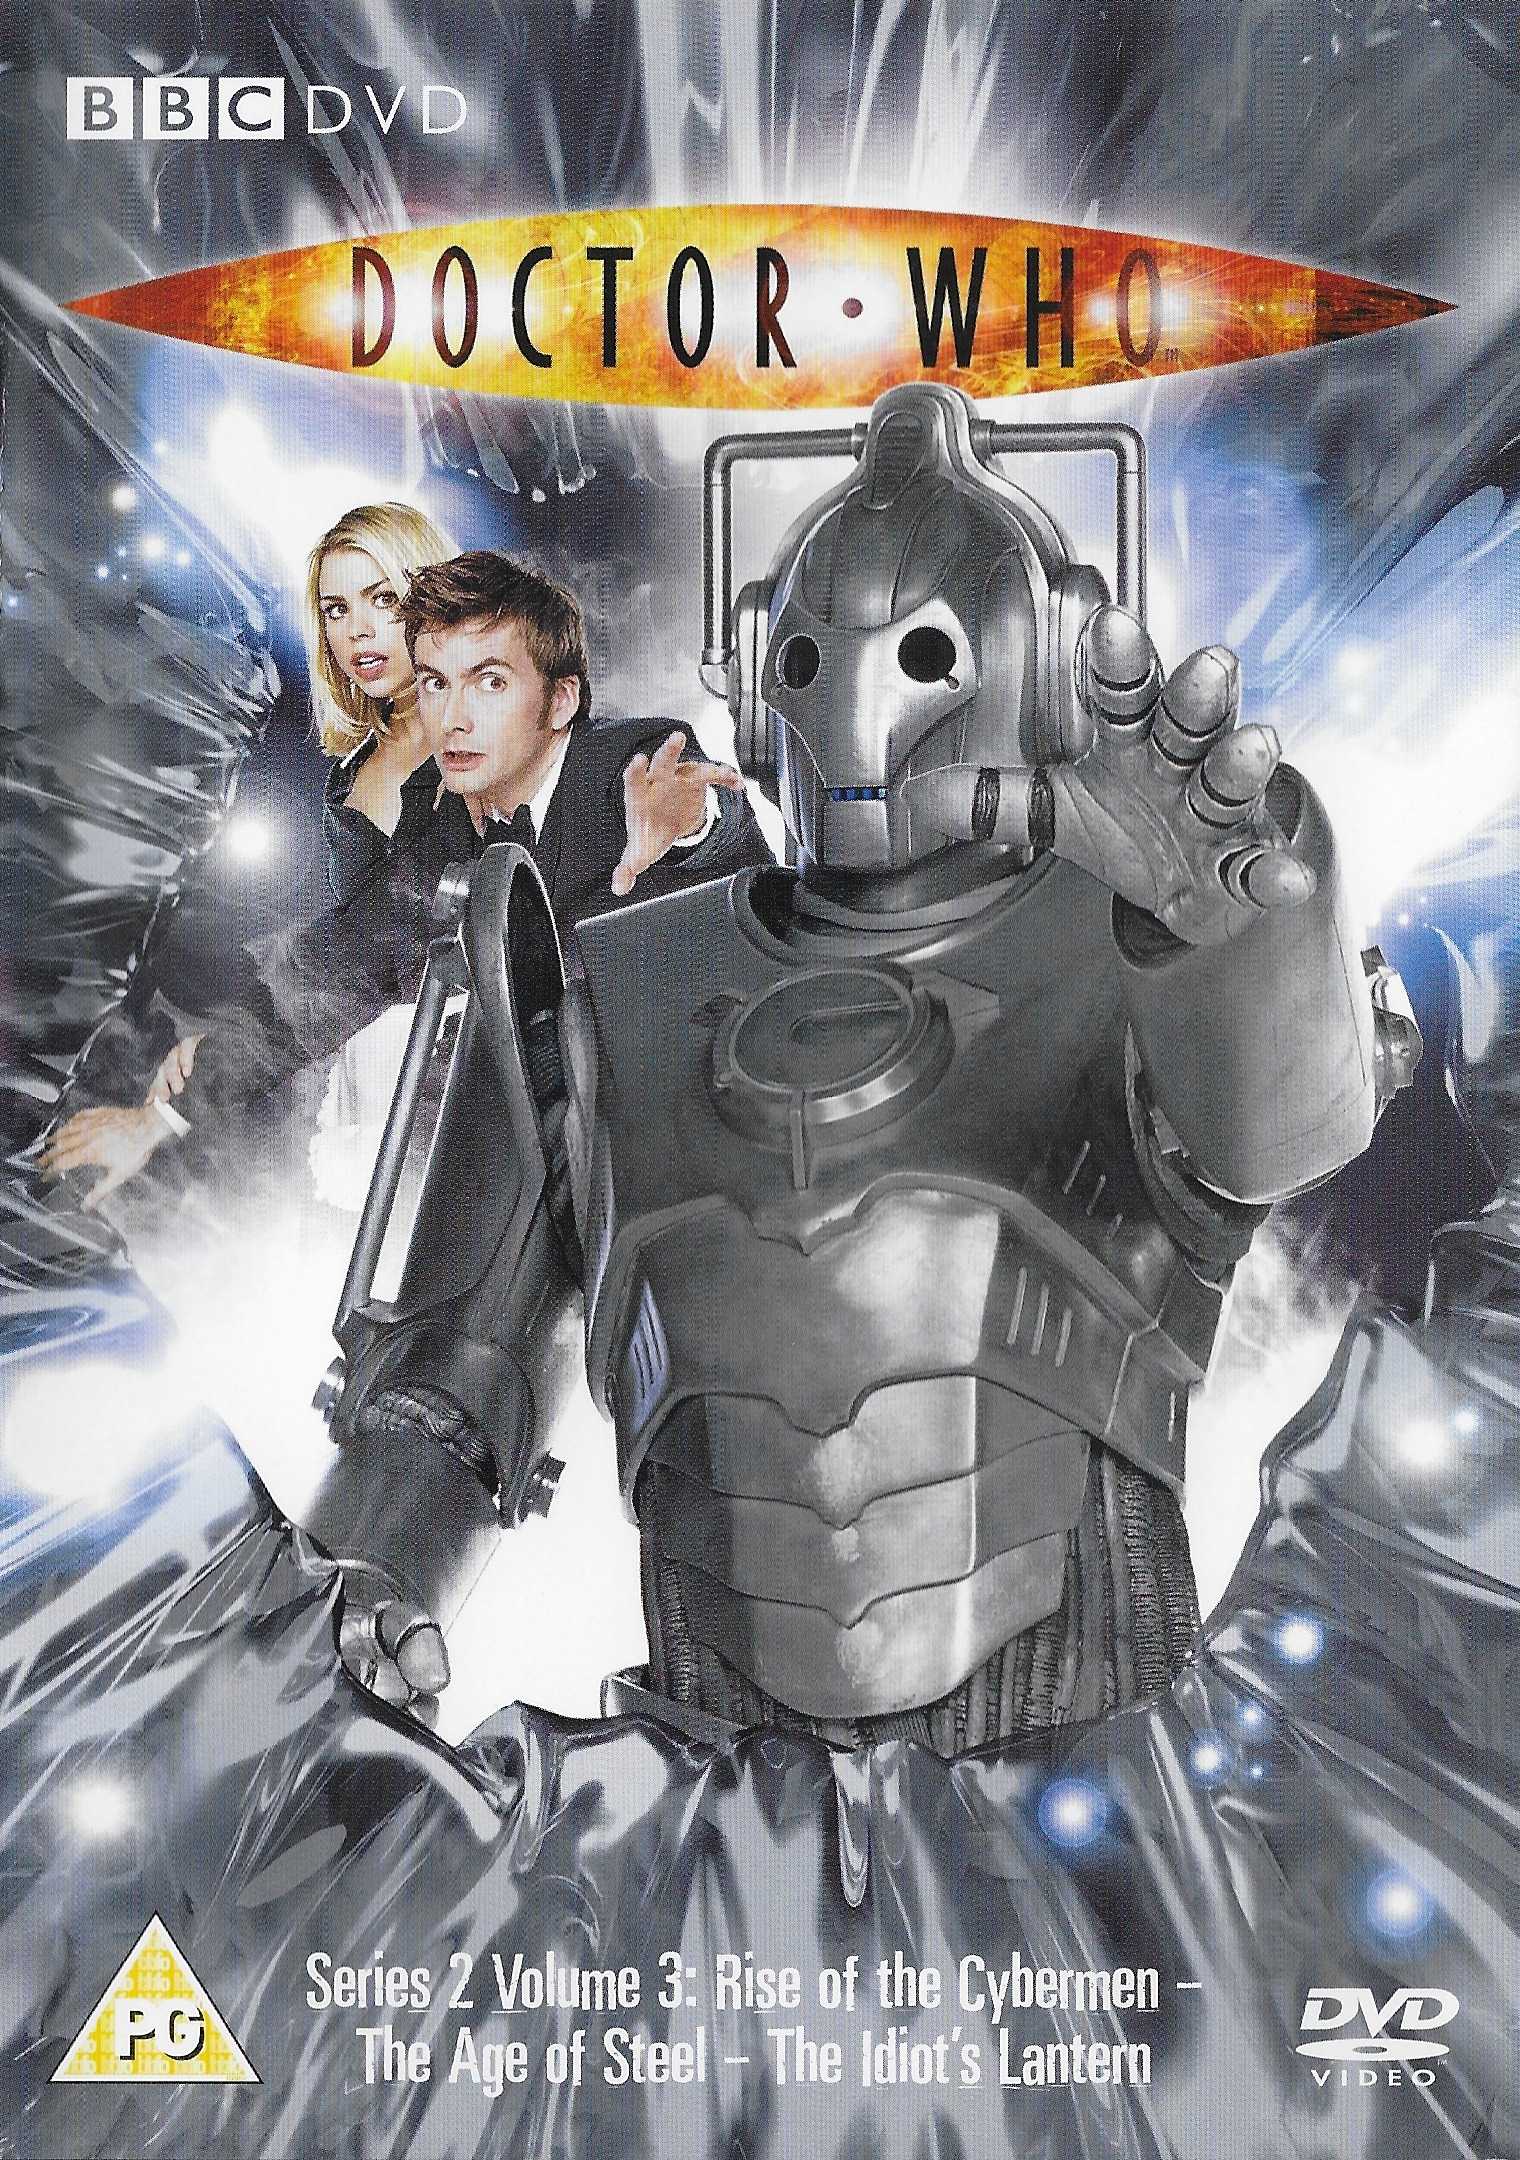 Picture of BBCDVD 1962 Doctor Who - Series 2, volume 3 by artist Tom MacRae / Mark Gatiss from the BBC dvds - Records and Tapes library